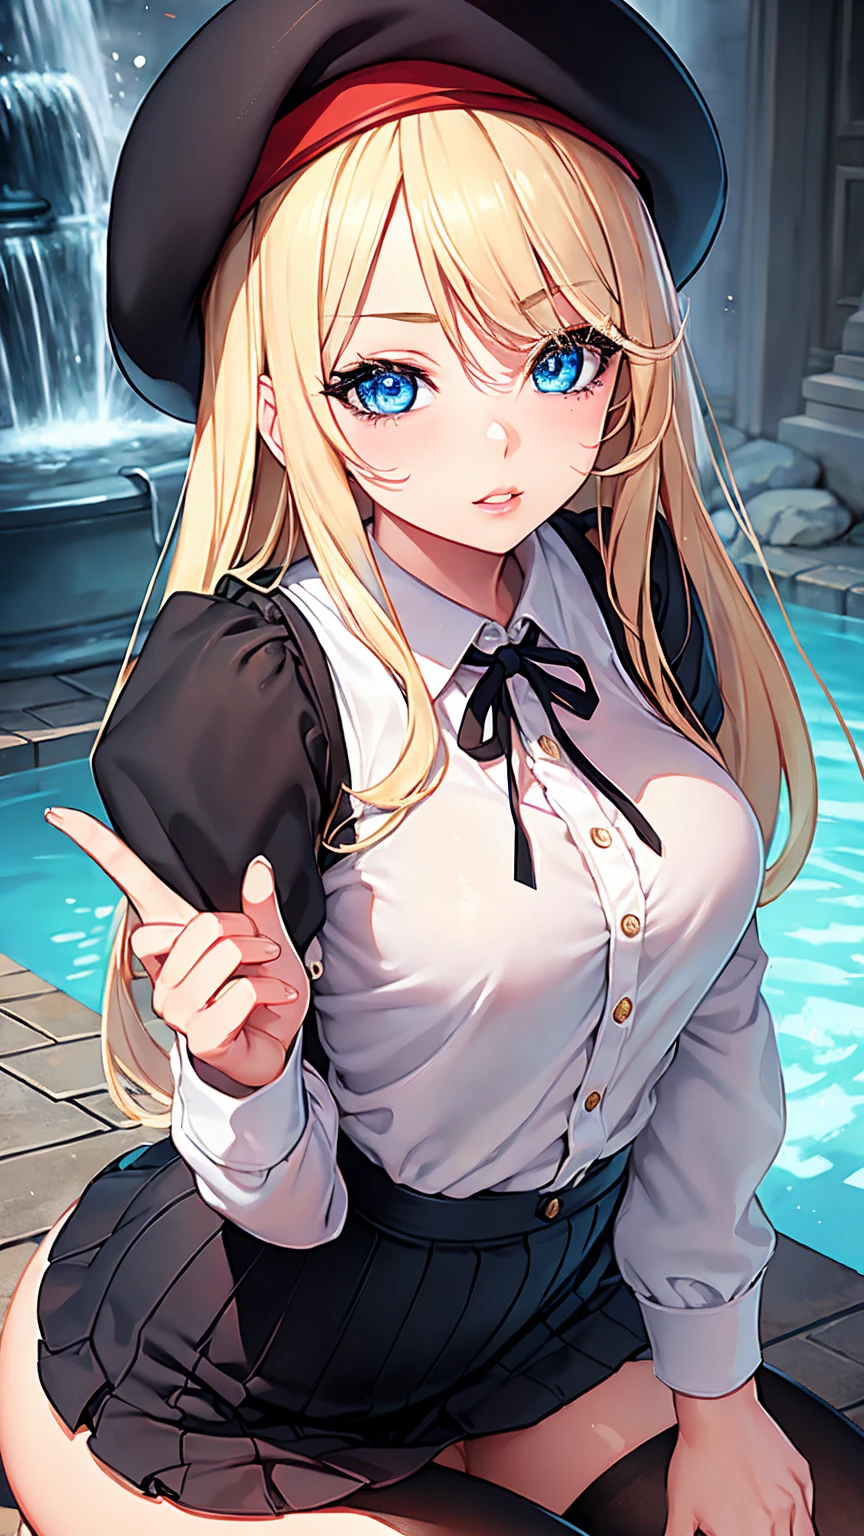 1girl, beautiful detailed eyes, beautiful detailed lips, extremely detailed face, long eyelashes, blonde hair, blue eyes, pink lips, , white shirt, black ribbon, charming atmosphere, manga artist, slightly erotic, wearing a red beret, holding a fountain pen and posing, anime-style, beautiful woman, her background is a solid black color that can be easily cropped, frontal view, looking up